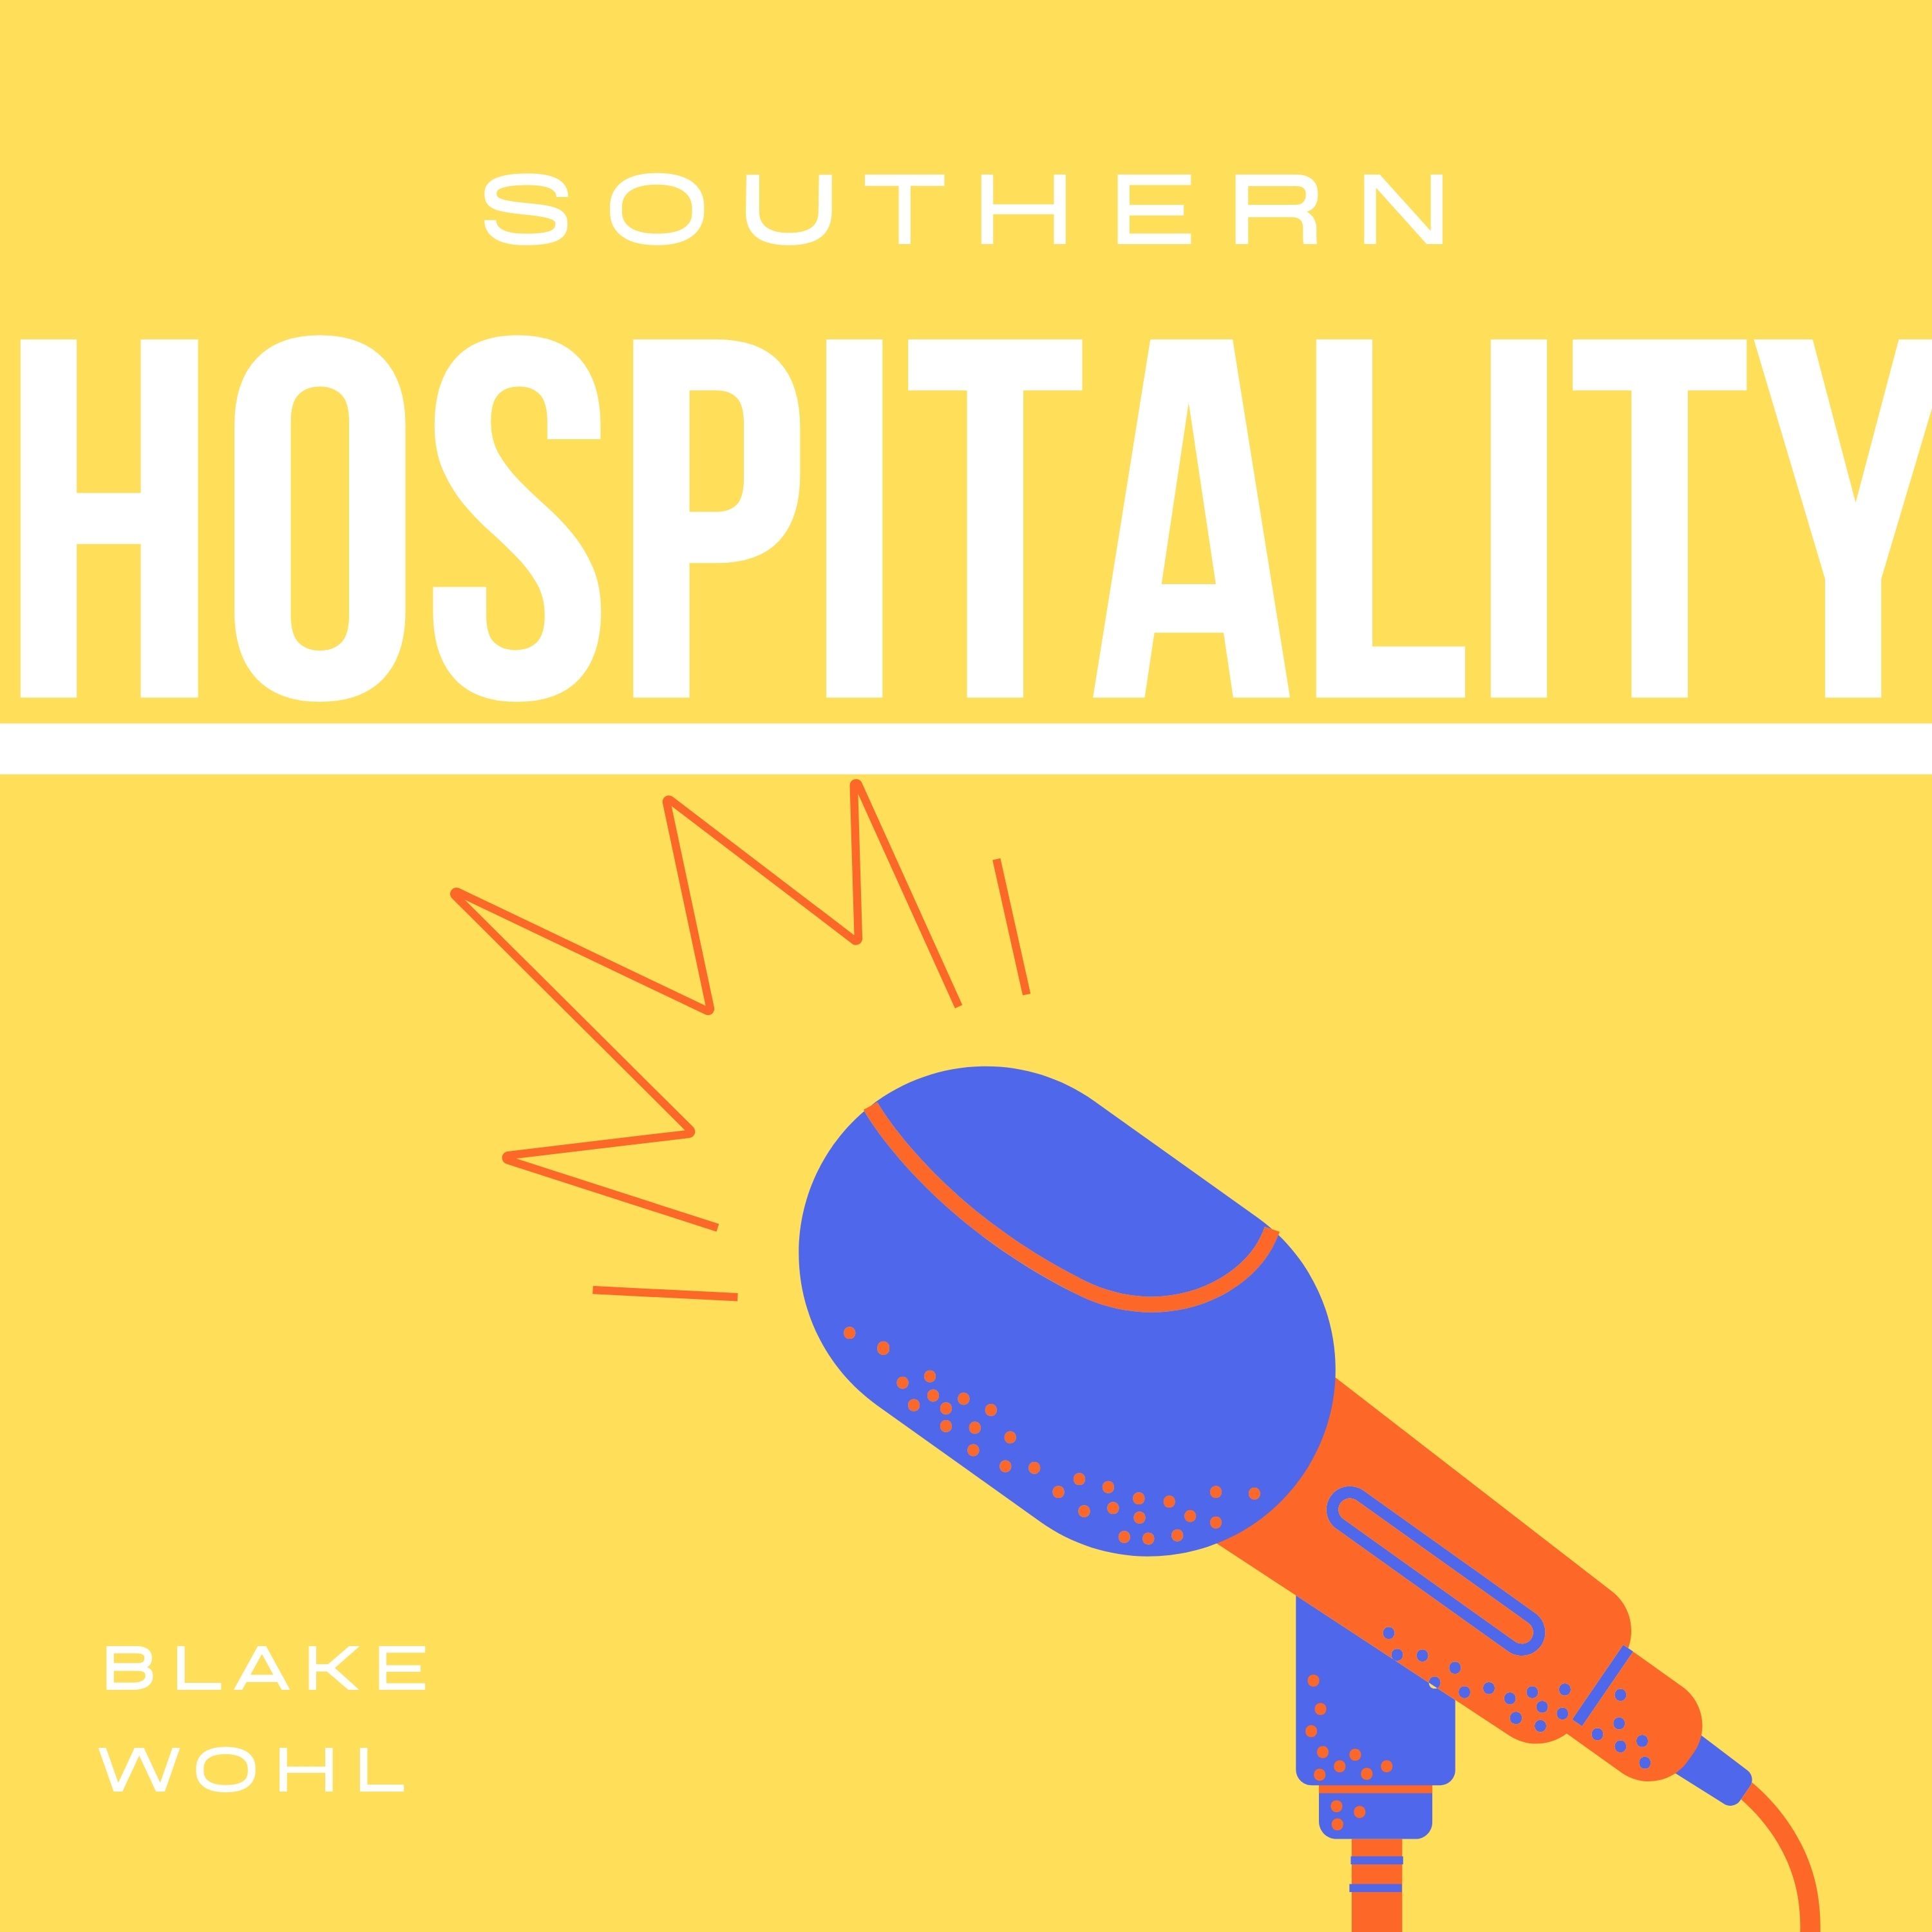 Artwork for Southern Hospitality